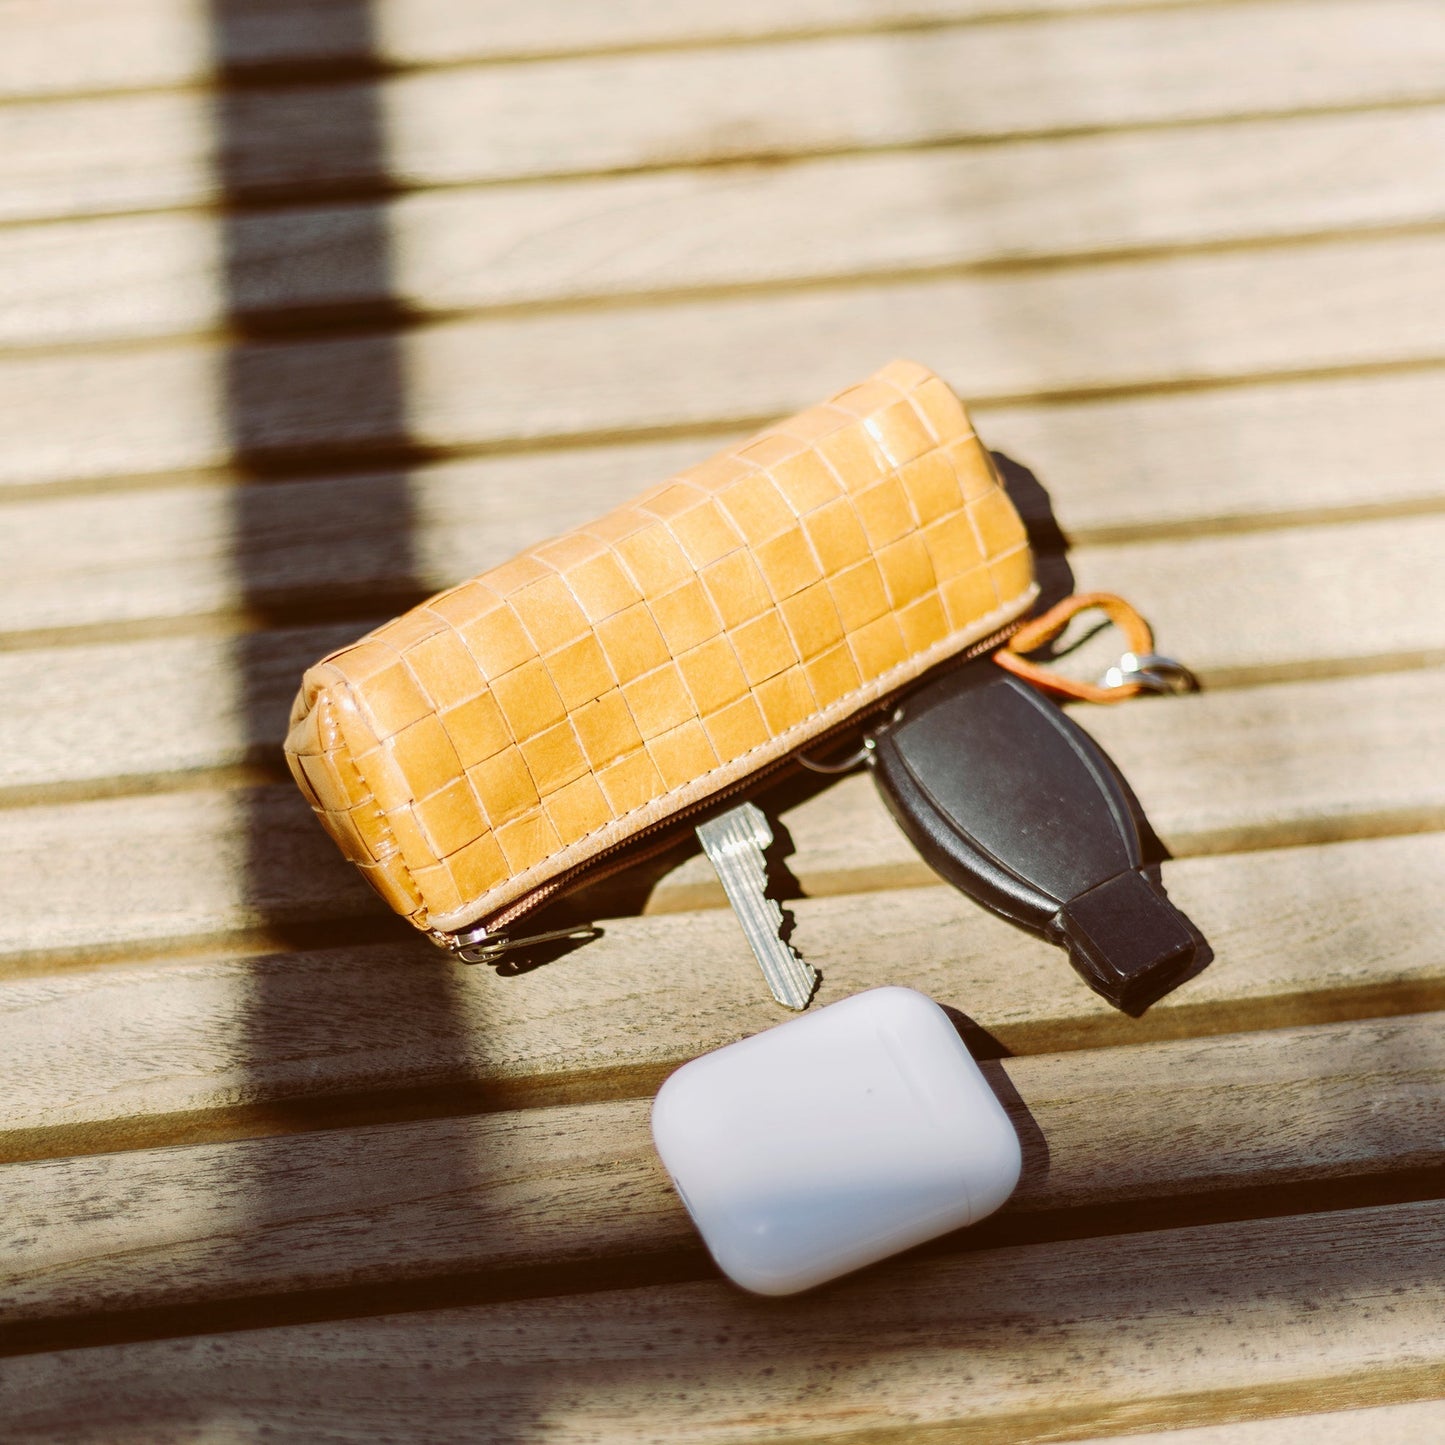 A tan woven washable paper key holder is shown on wooden slats. It is unzipped to reveal a house key, a car key, and a set of Air Pods.